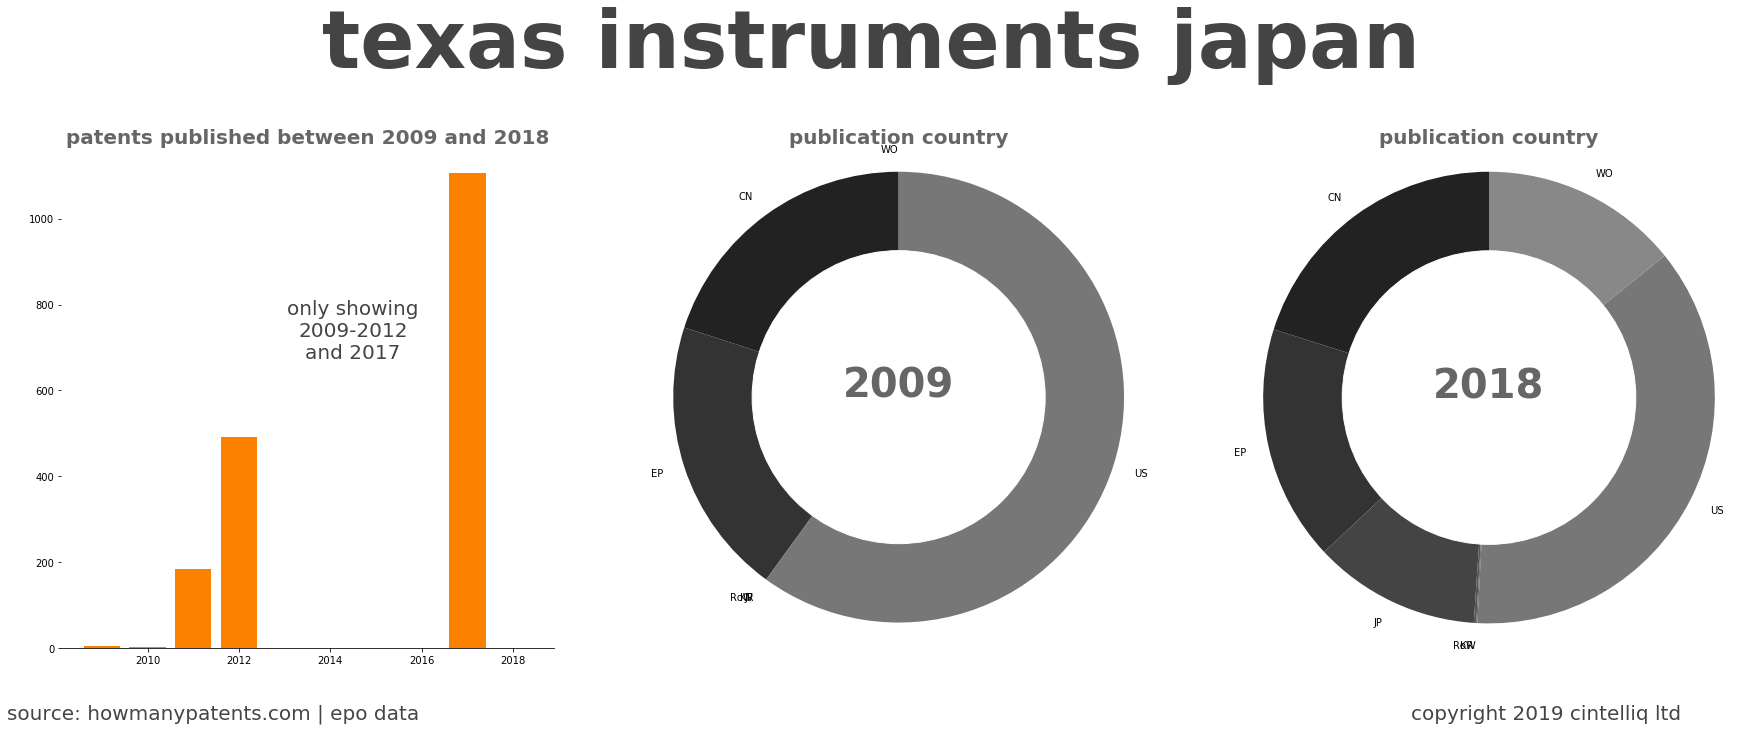 summary of patents for Texas Instruments Japan